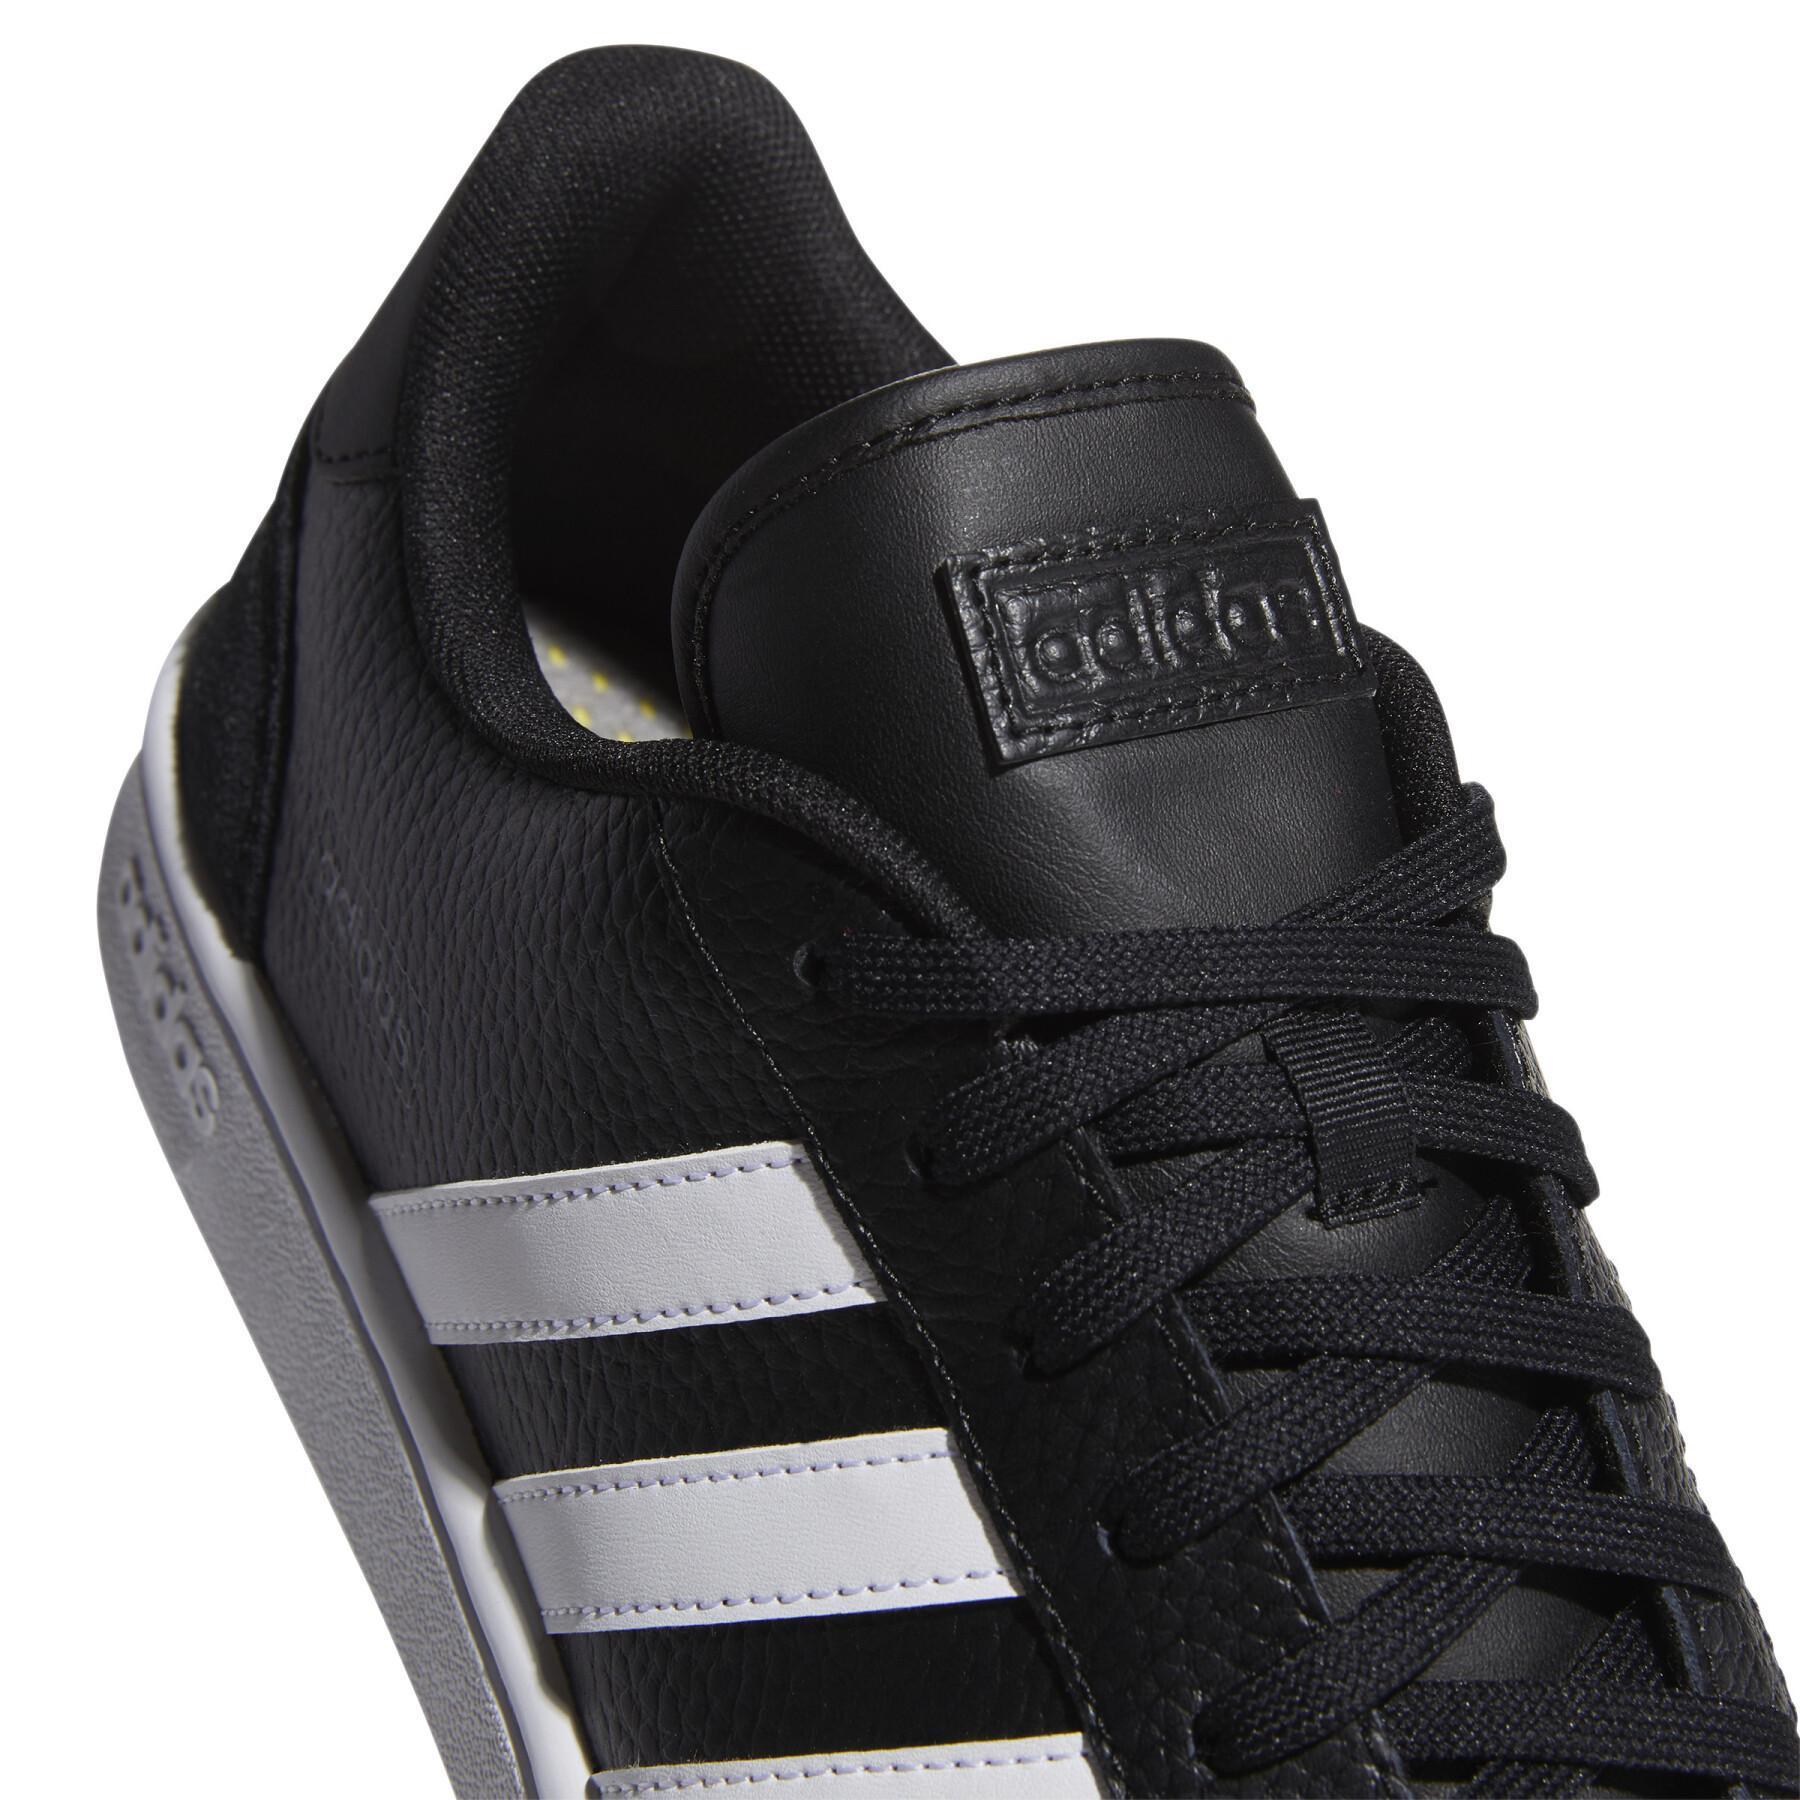 Trainers adidas Grand Court SE